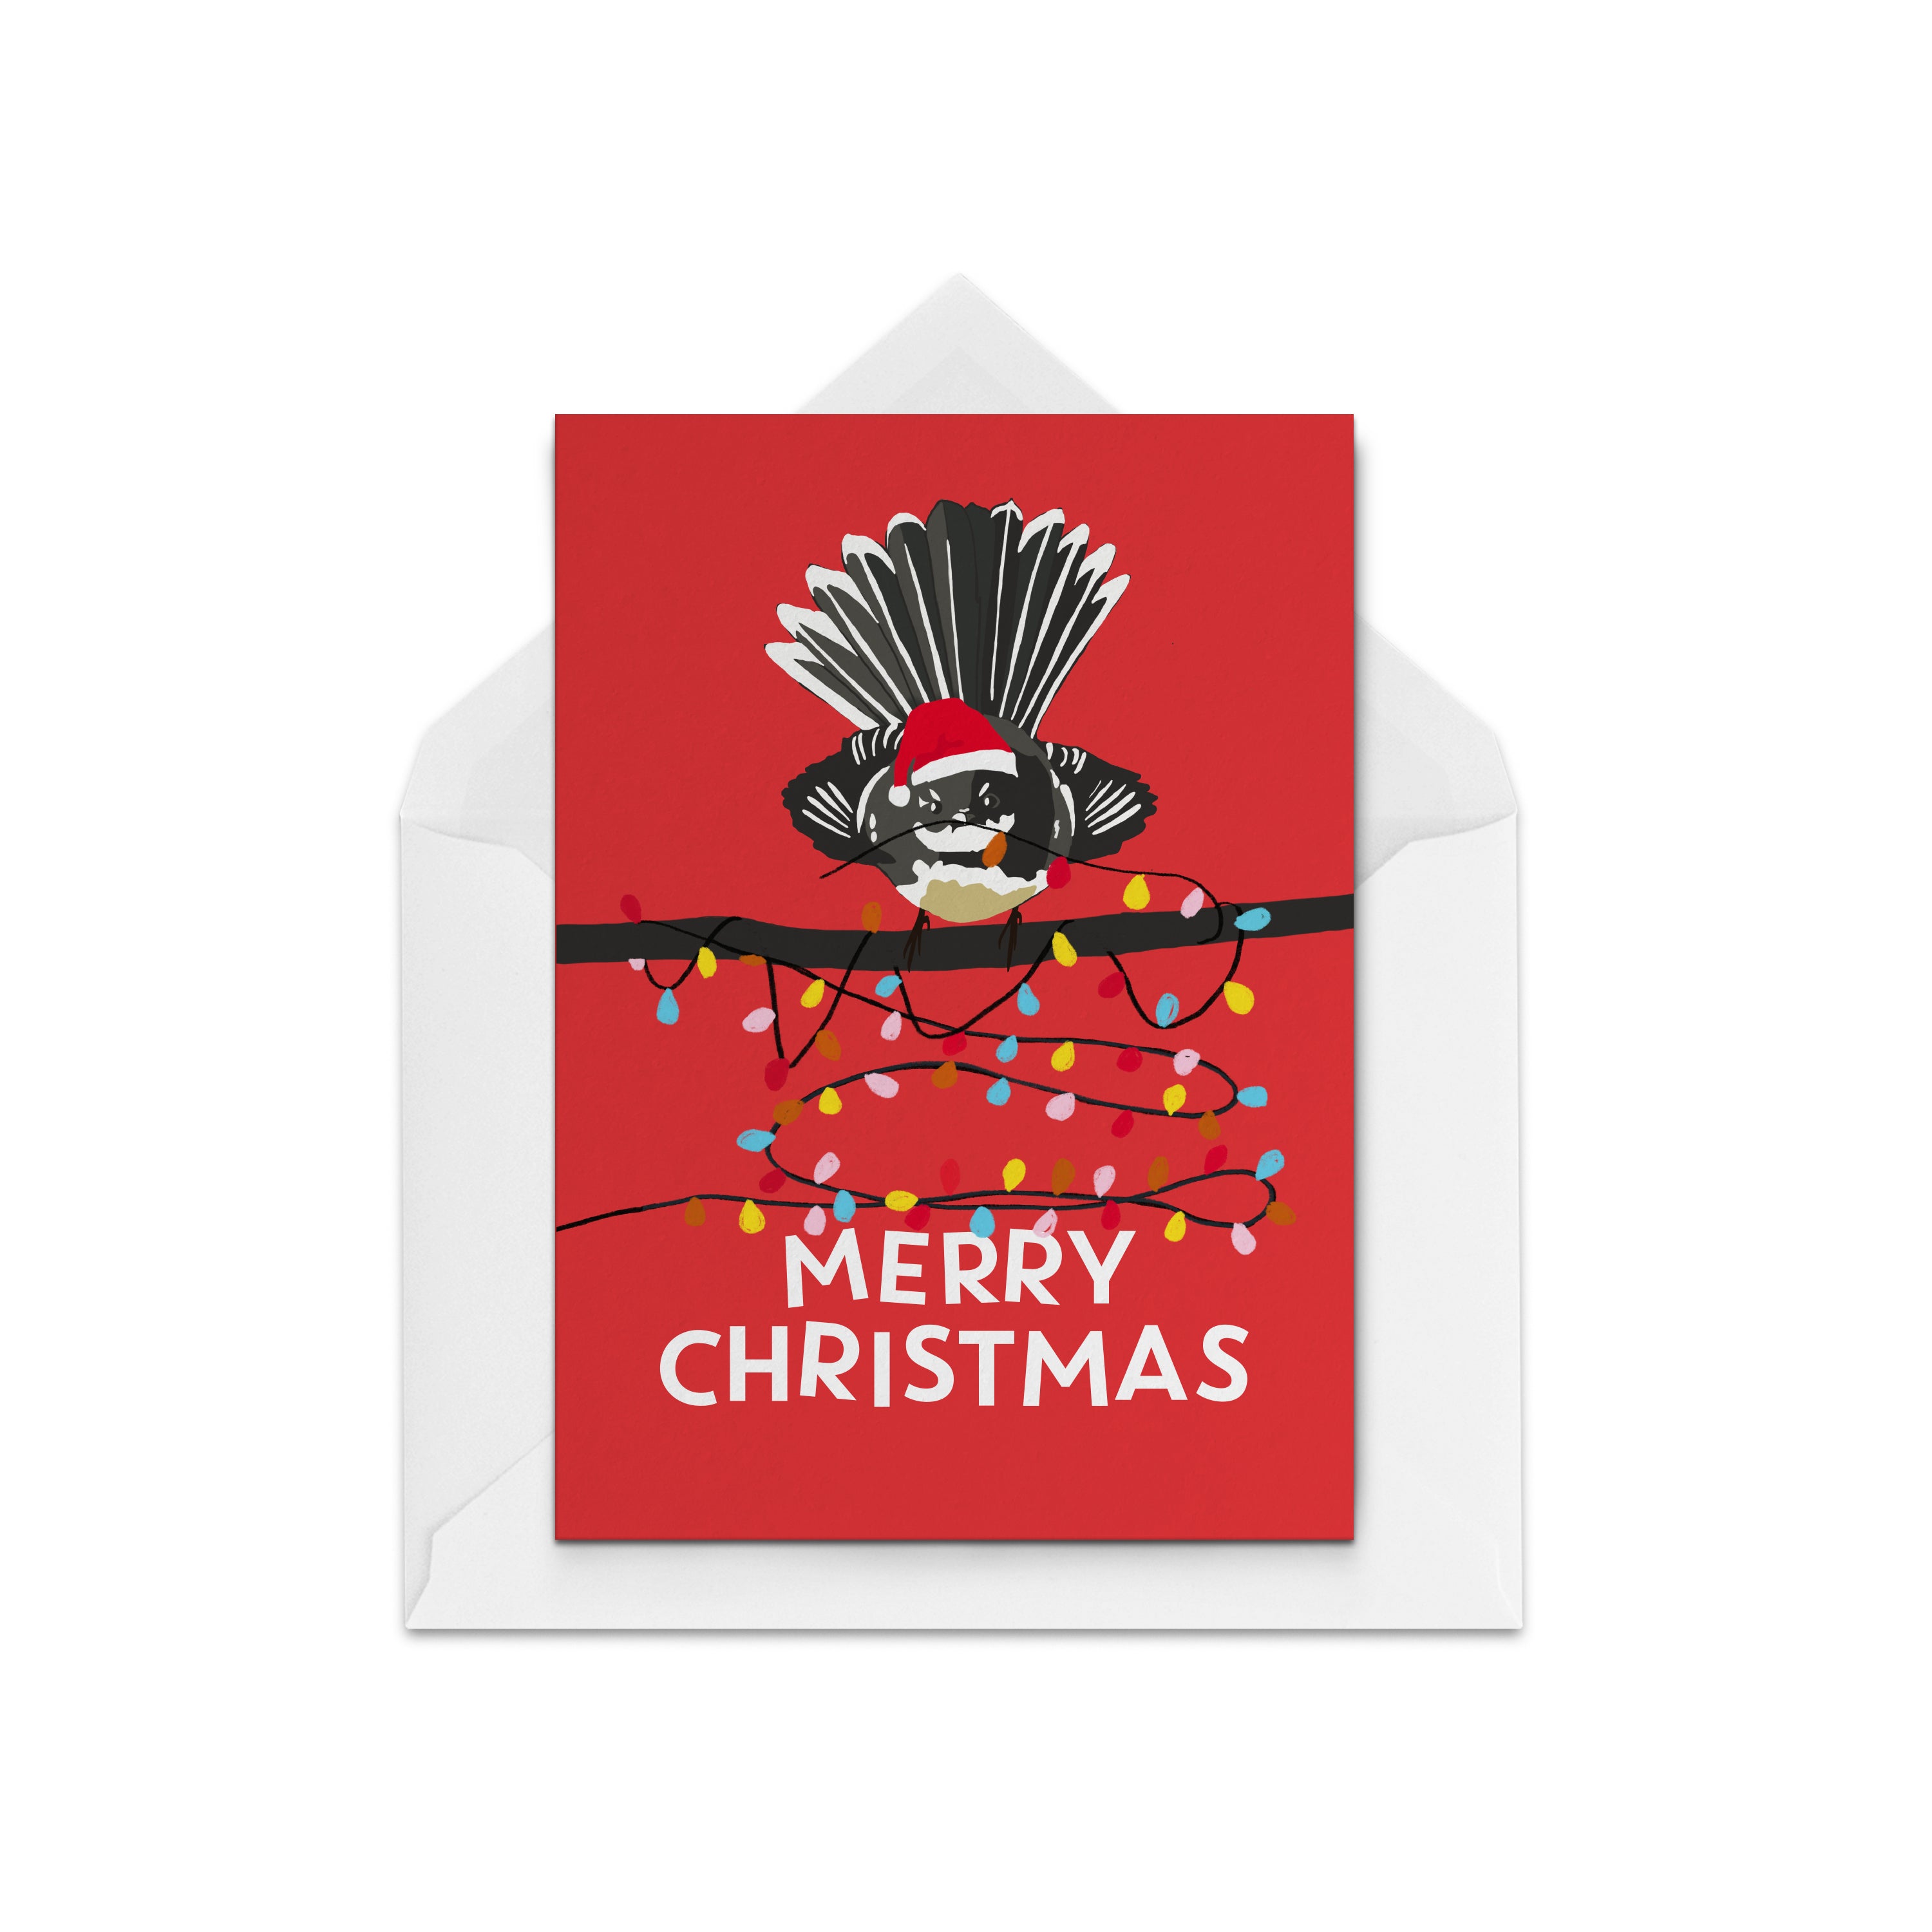 Christmas Card with a picture of a Fantail by The Paper People Greeting Cards: https://www.thepaperpeople.co.nz/collections/christmas-cards-blank-inside